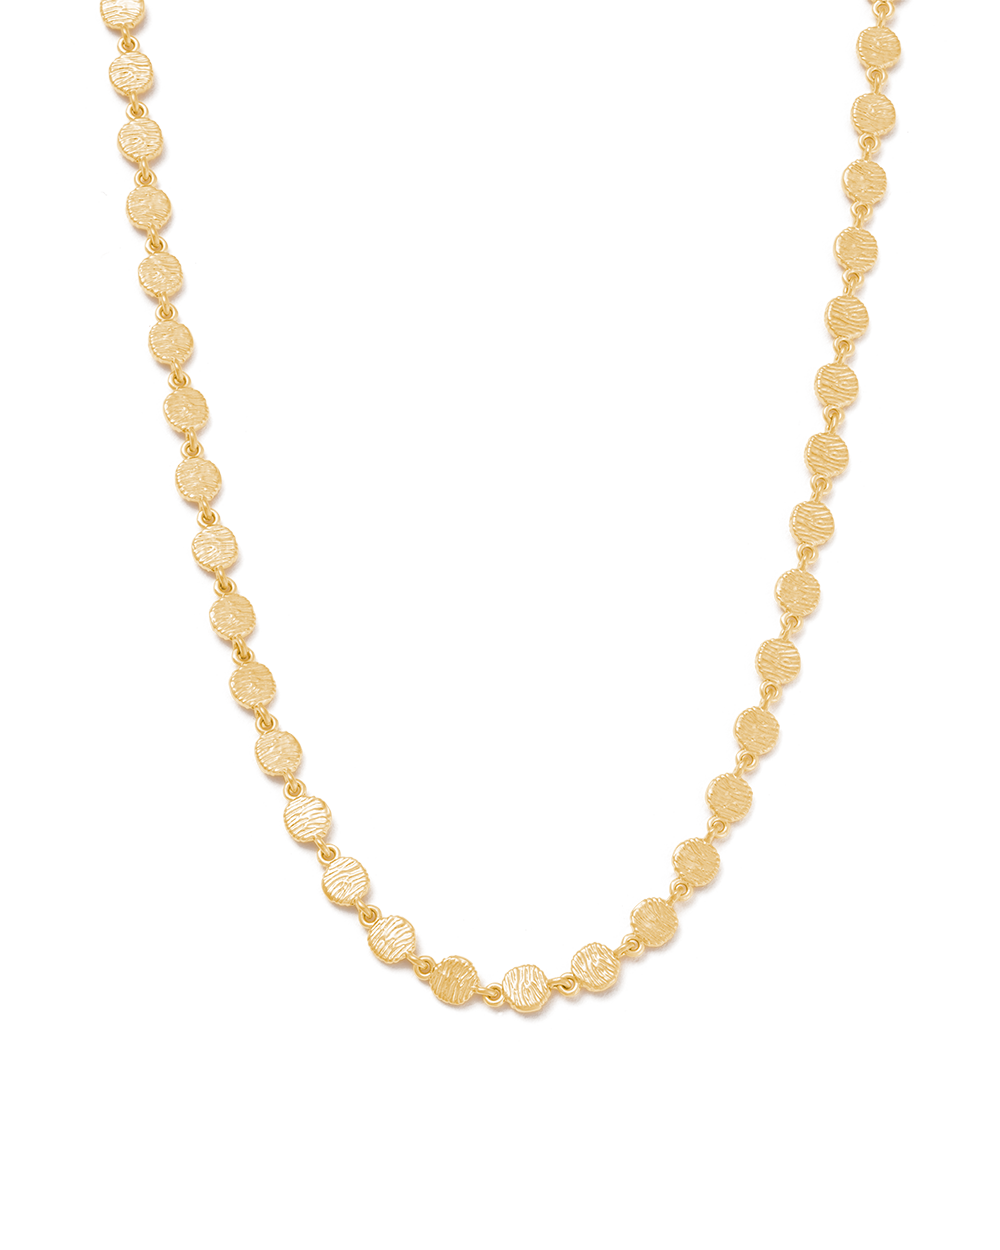 kirstin-ash-reflection-chain-necklace-18k-gold-plated-1